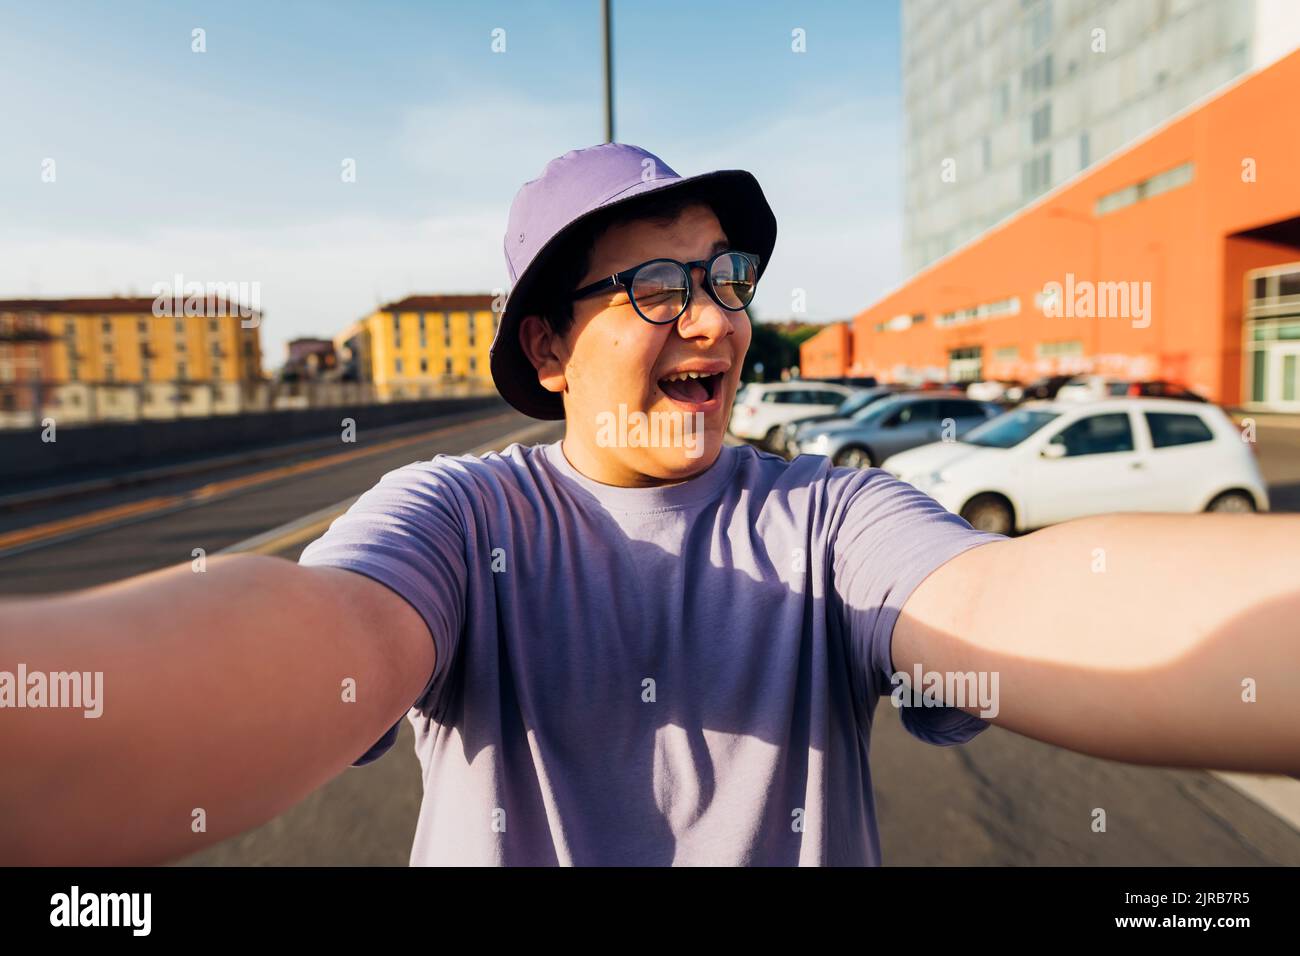 Teenage boy winking and taking selfie at street on sunny day Stock Photo